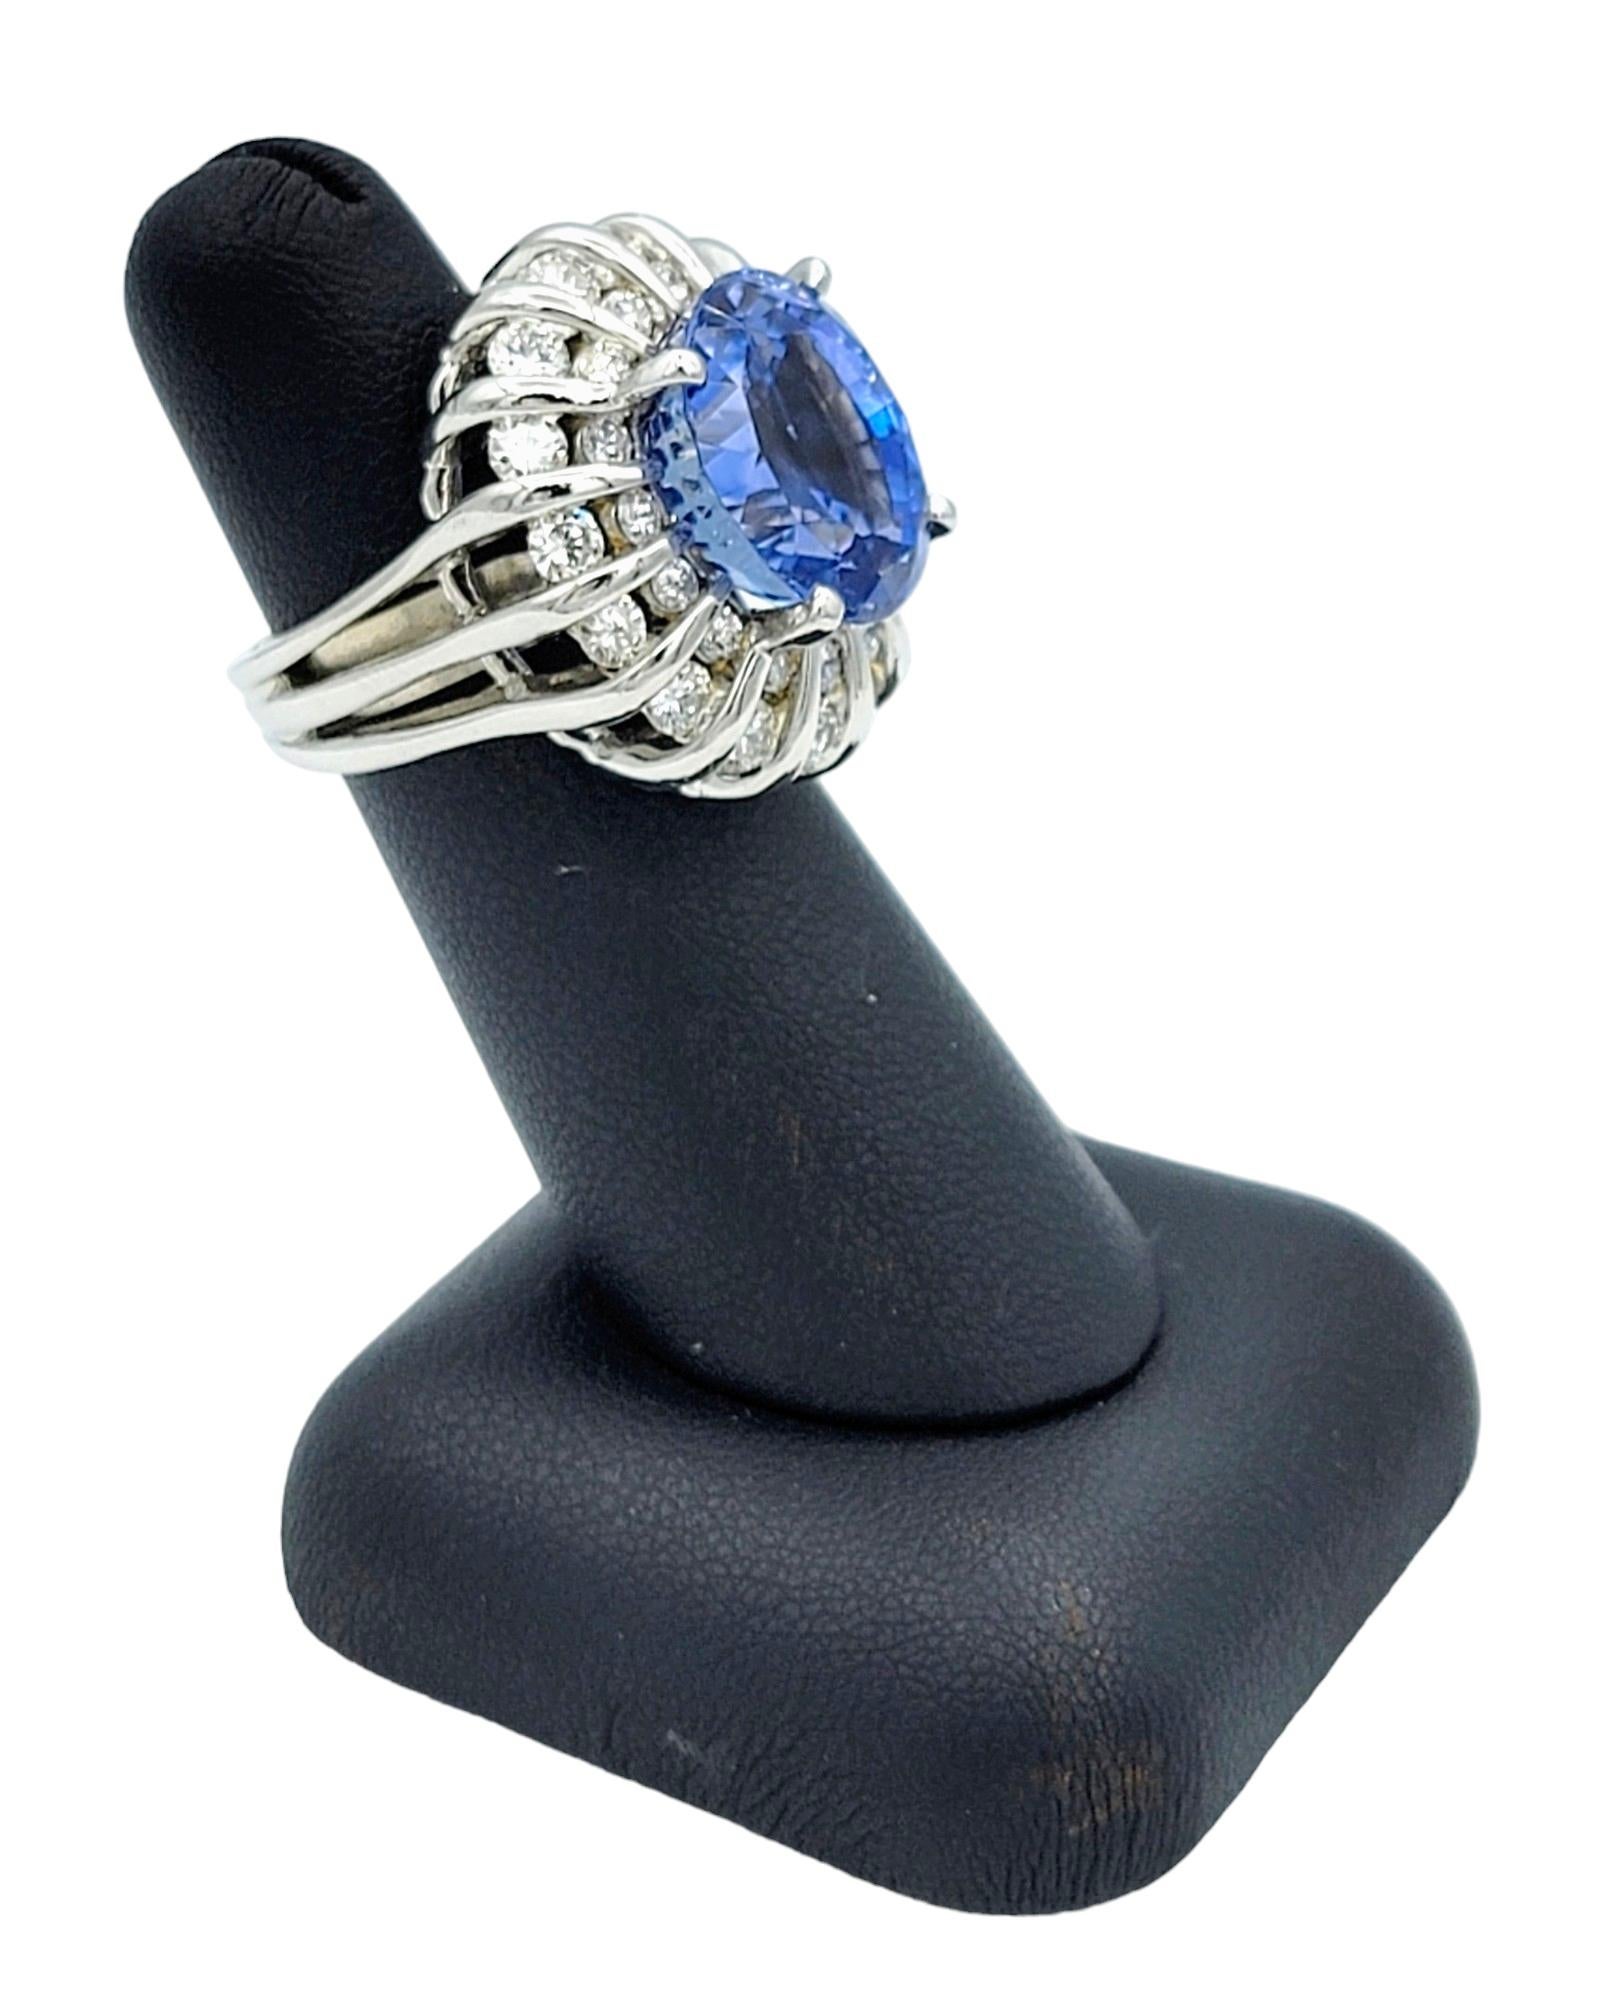 Rare Untreated 16.27 Carat Oval Cut Ceylon Sapphire and Double Diamond Halo Ring For Sale 5